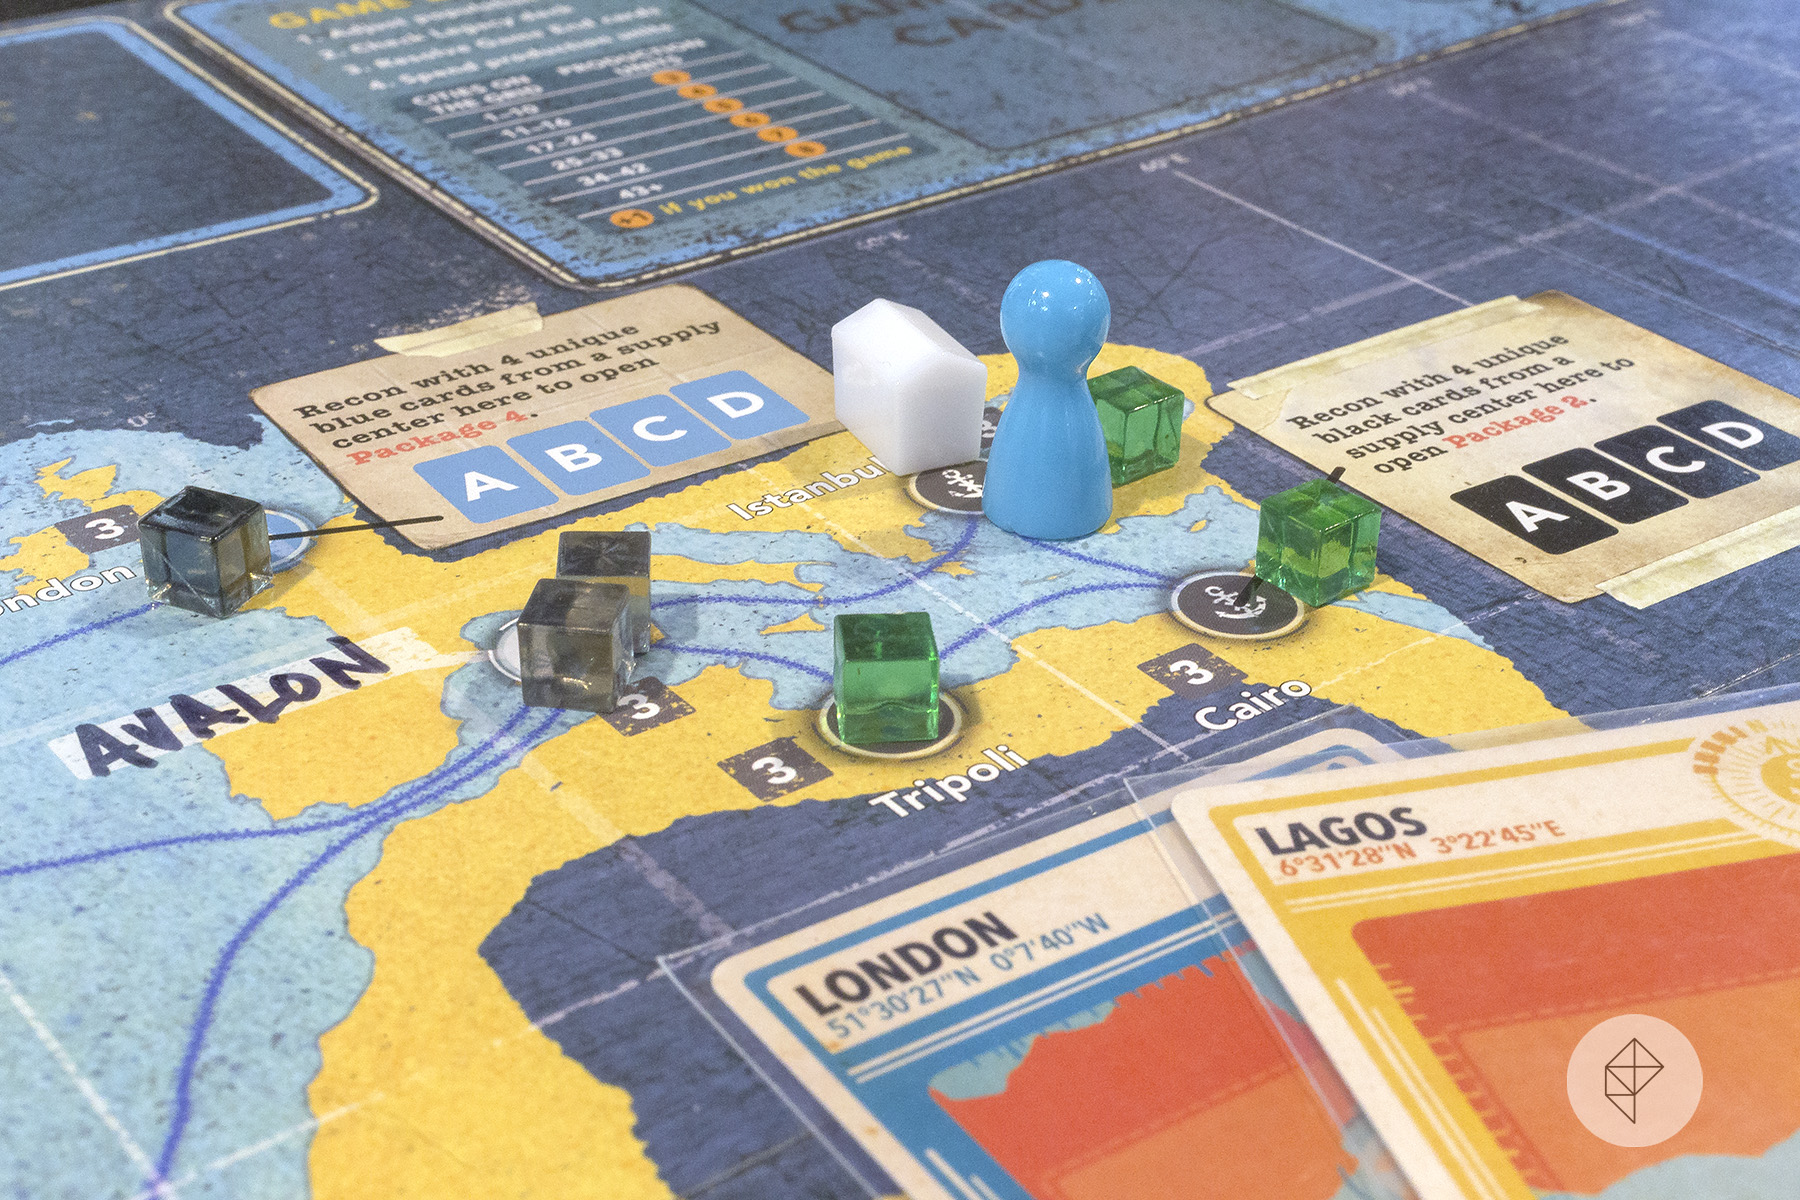 Disease cubes in Tripoli and Cairo while a white pawn looks on.